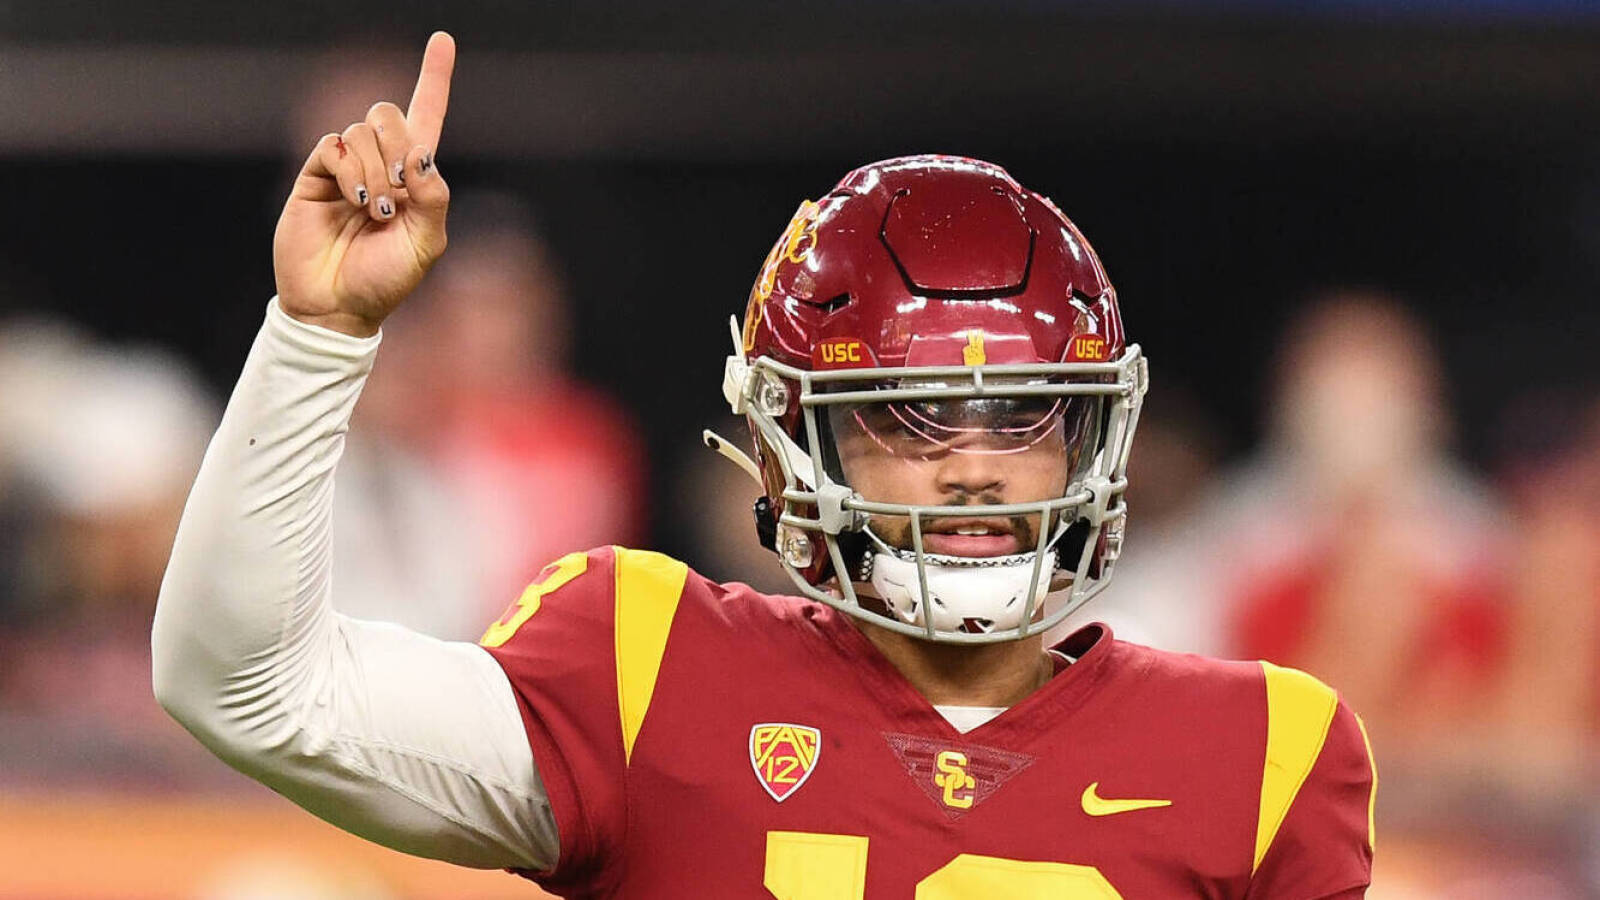 2023 NFL Mock Draft: Way-Too-Early Edition - Draft Network